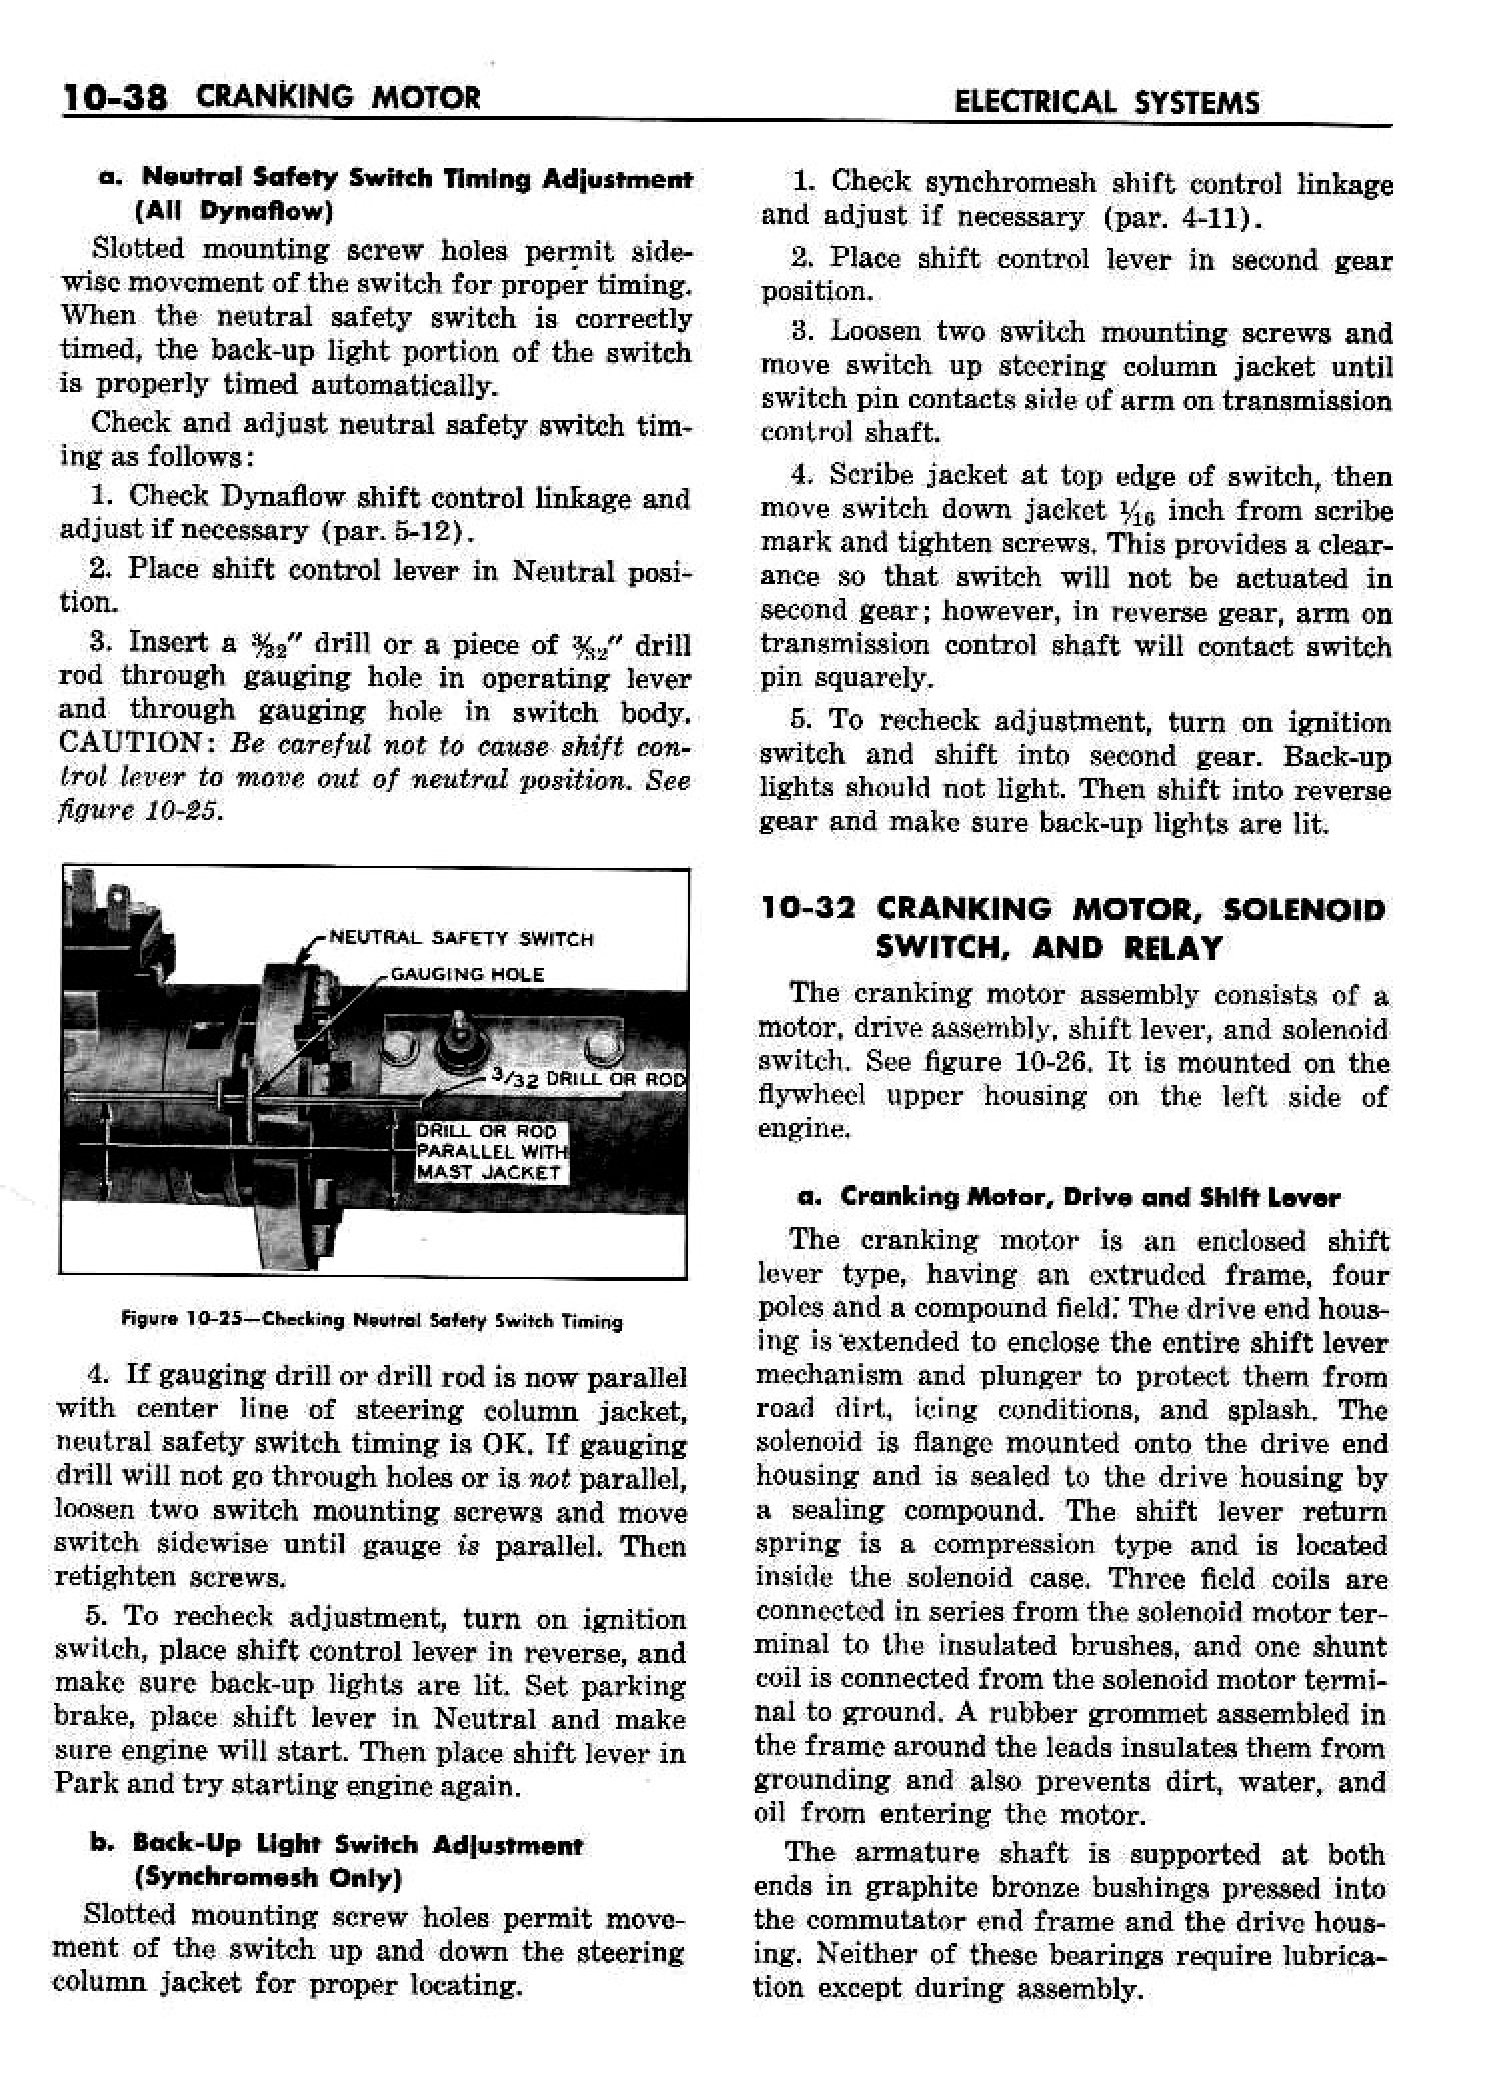 n_11 1958 Buick Shop Manual - Electrical Systems_38.jpg